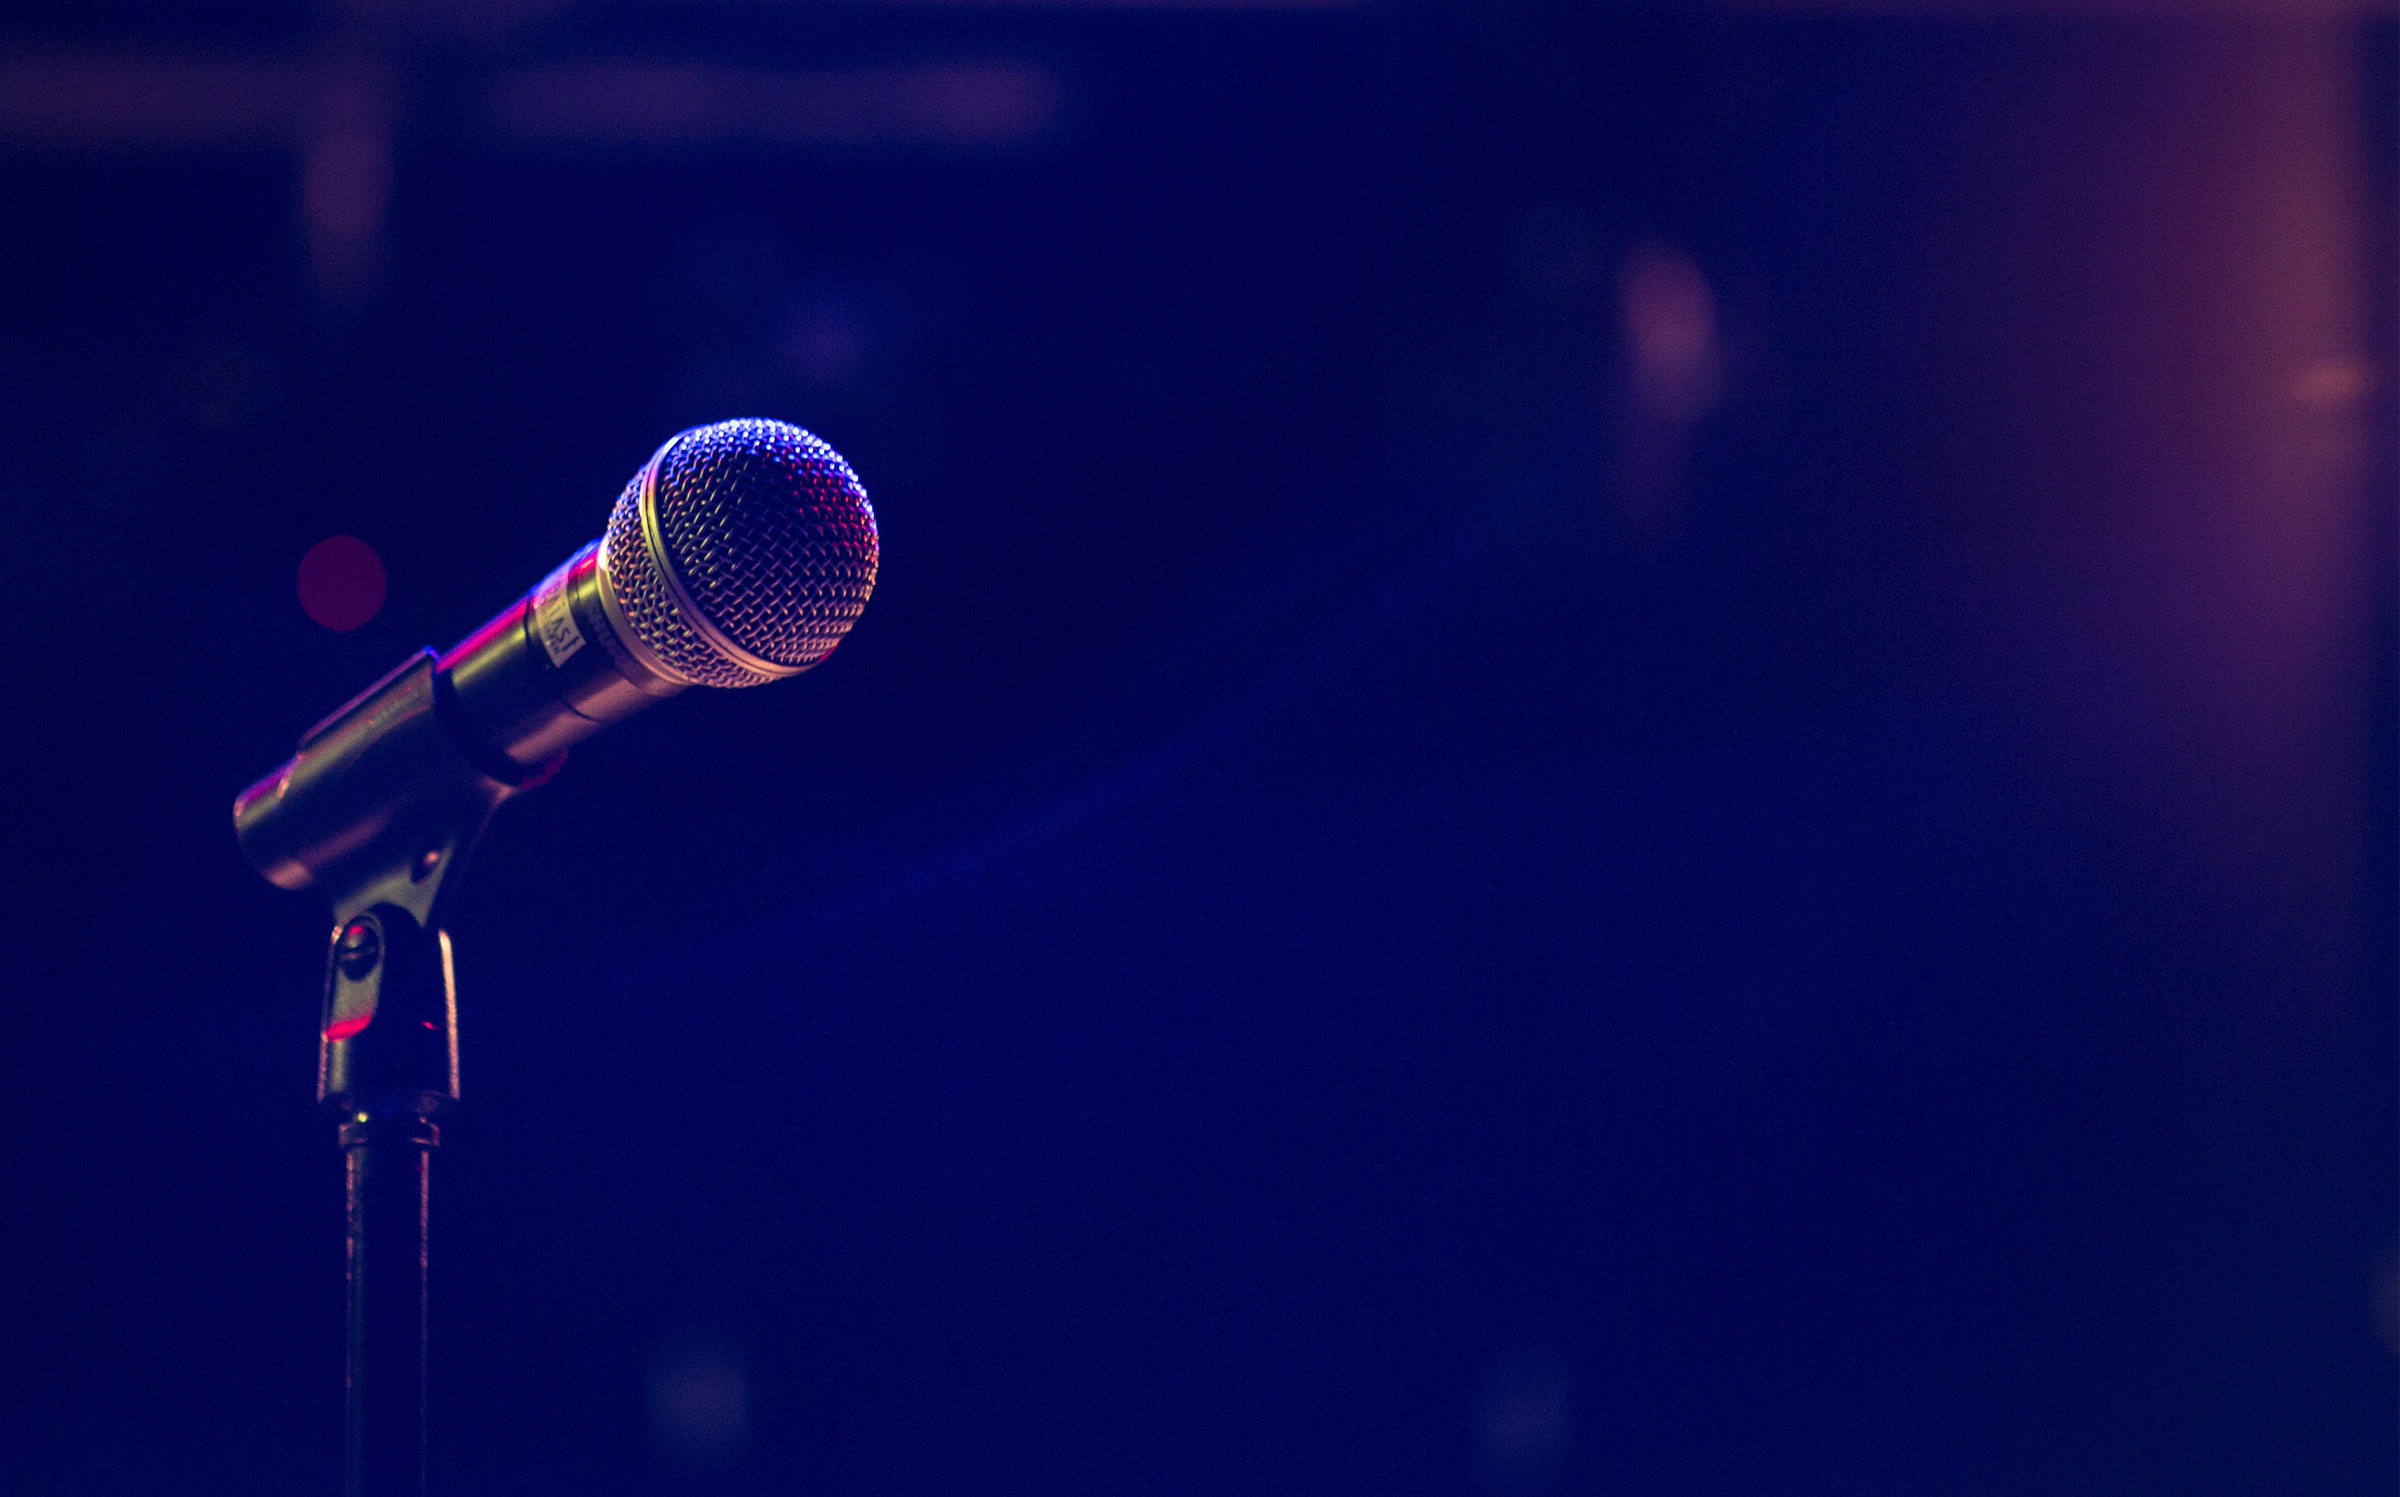 A photo of a microphone with a dark background